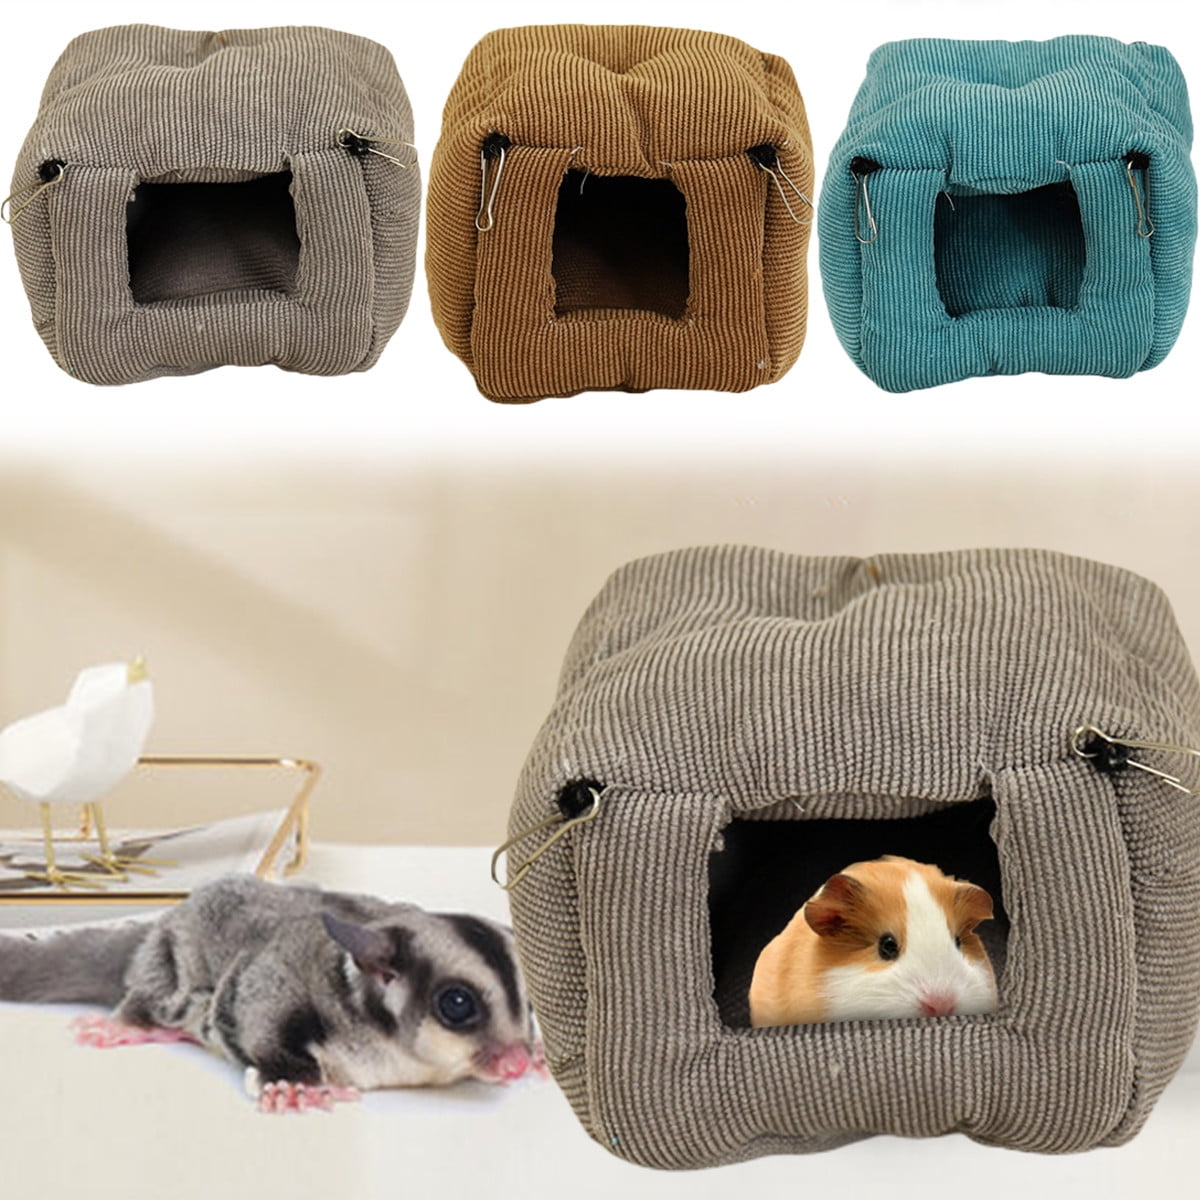 Bunny Hamster Squirrel Soft Warm Plush Bed Small Pet House Cage Nest Hammock 